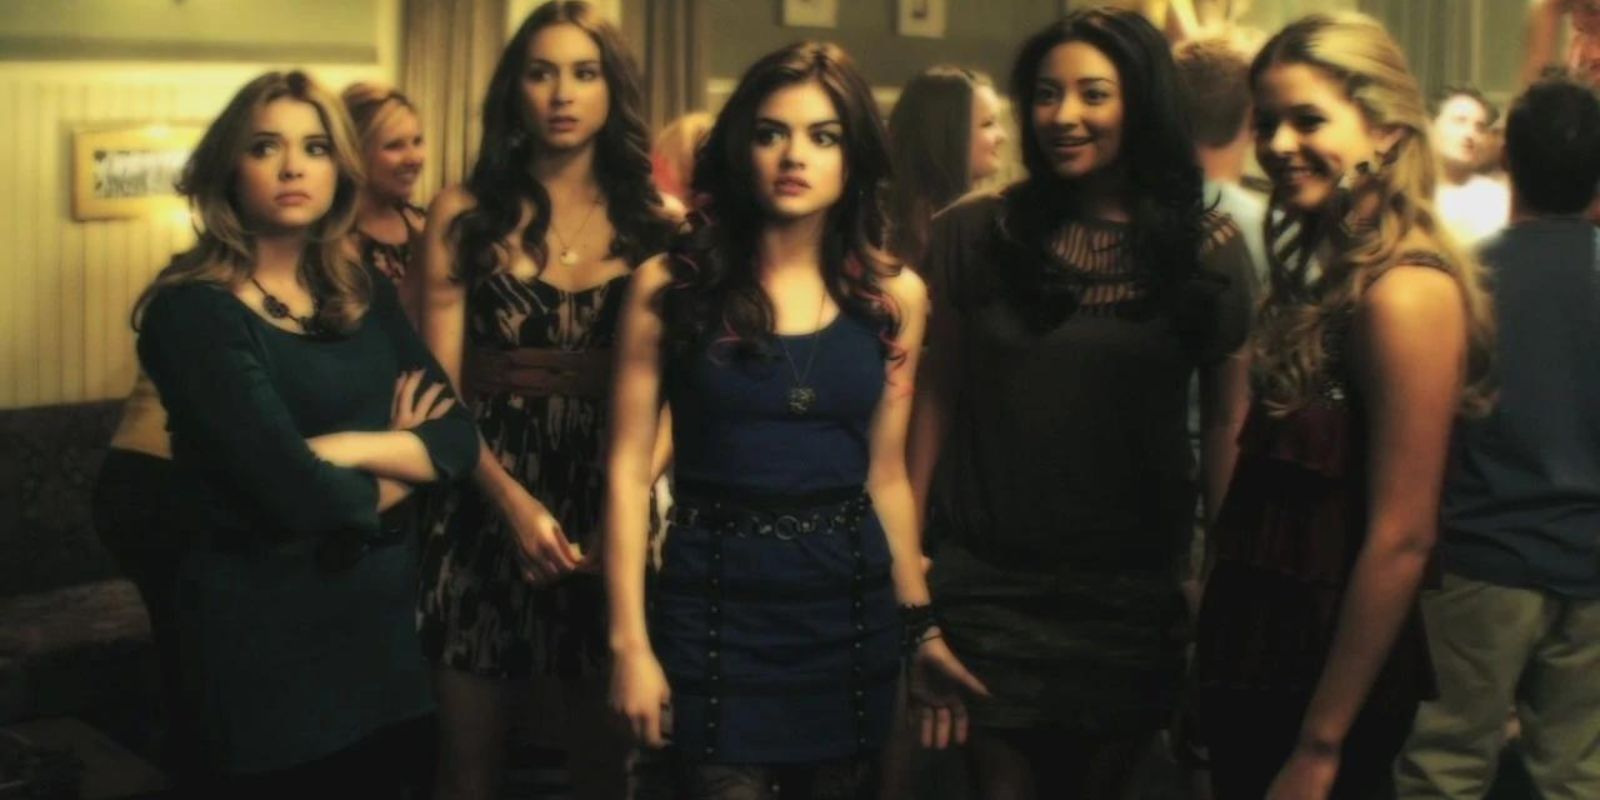 Alison and friends looking off screen together